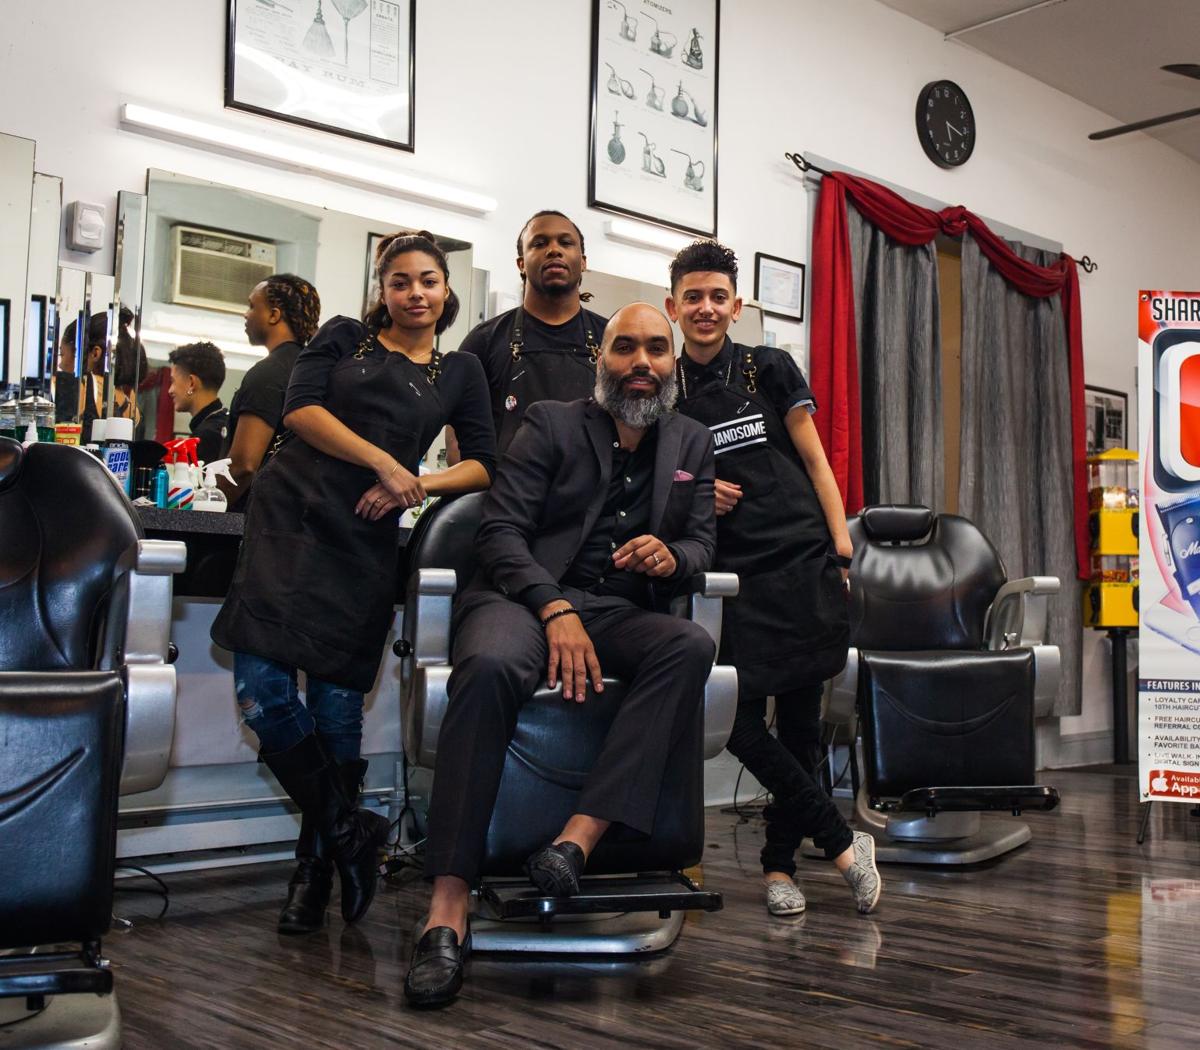 Sharper Image Barber Shops Offer More Than Just A Haircut